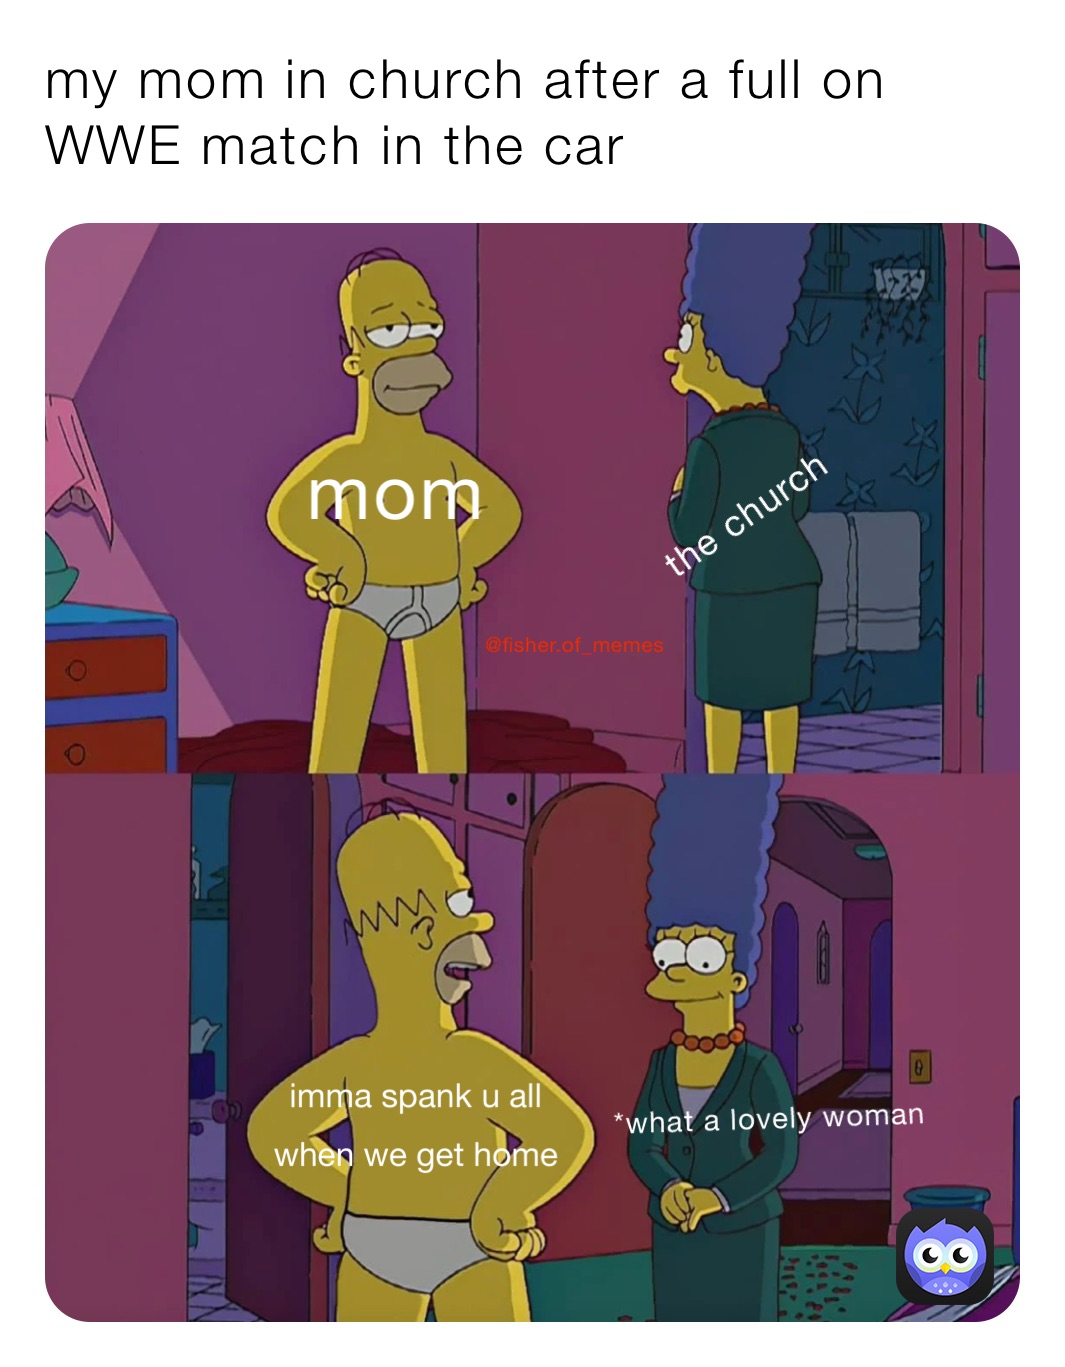 my mom in church after a full on WWE match in the car